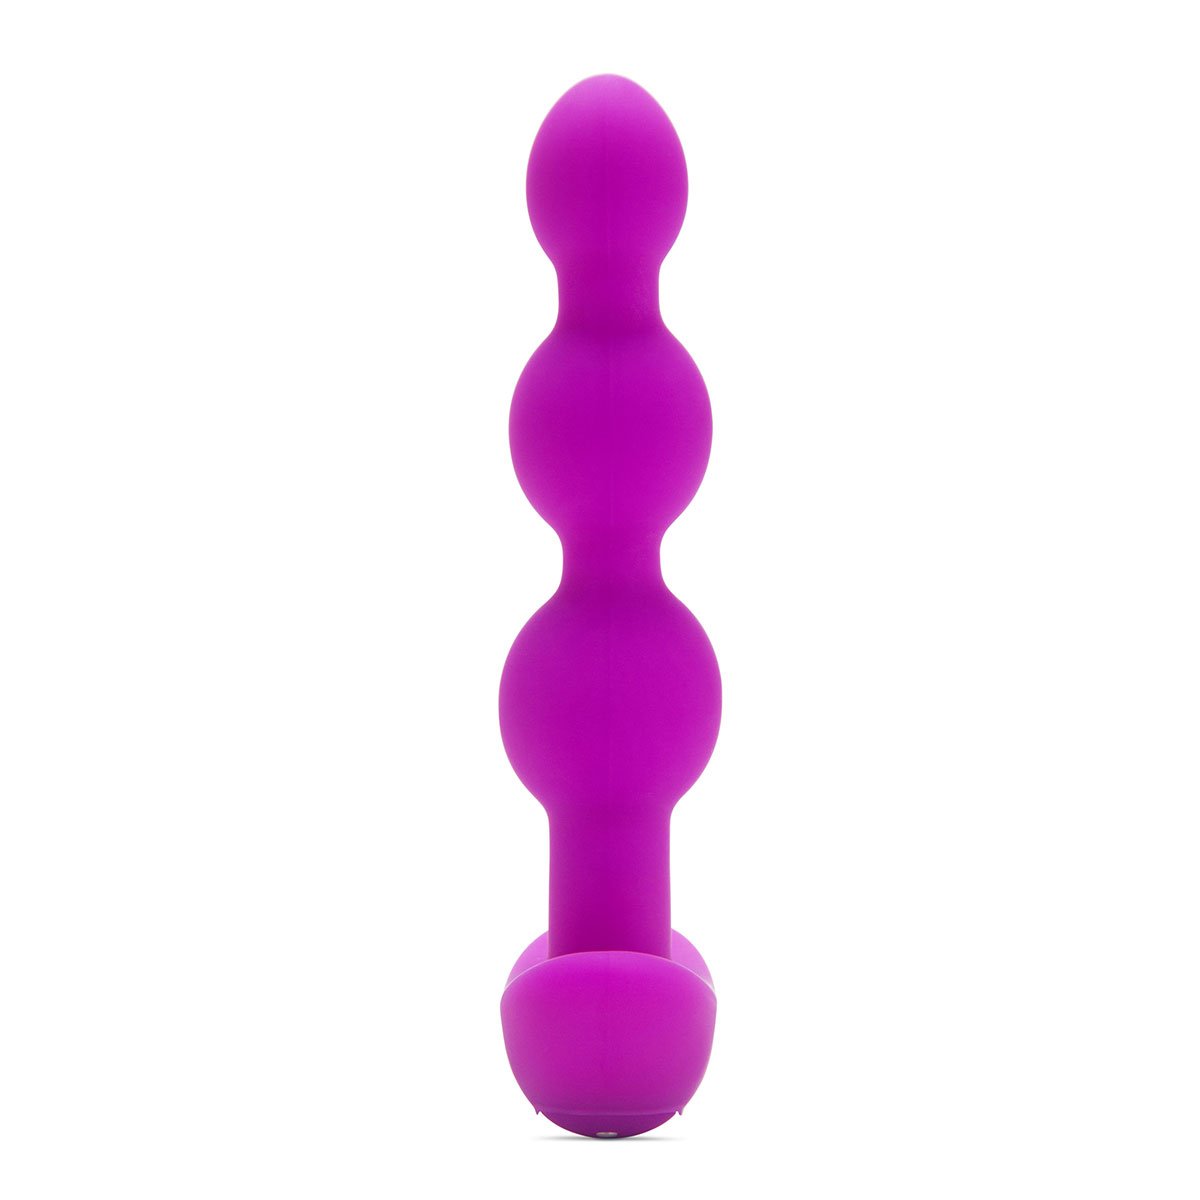 B-Vibe Triplet Beads - Buy At Luxury Toy X - Free 3-Day Shipping